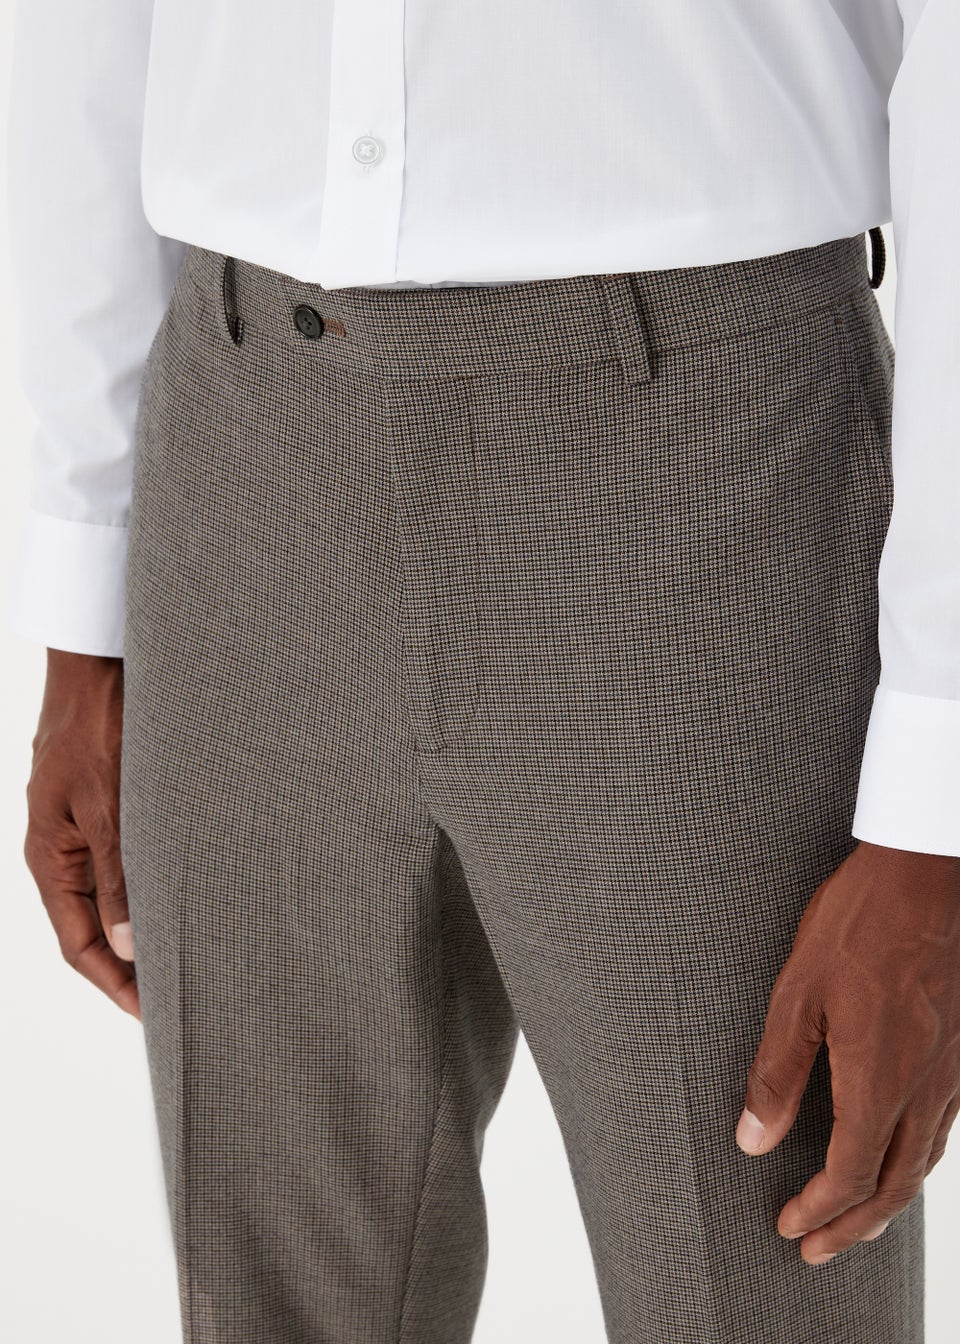 Taylor & Wright Severn Brown Tailored Fit Trousers